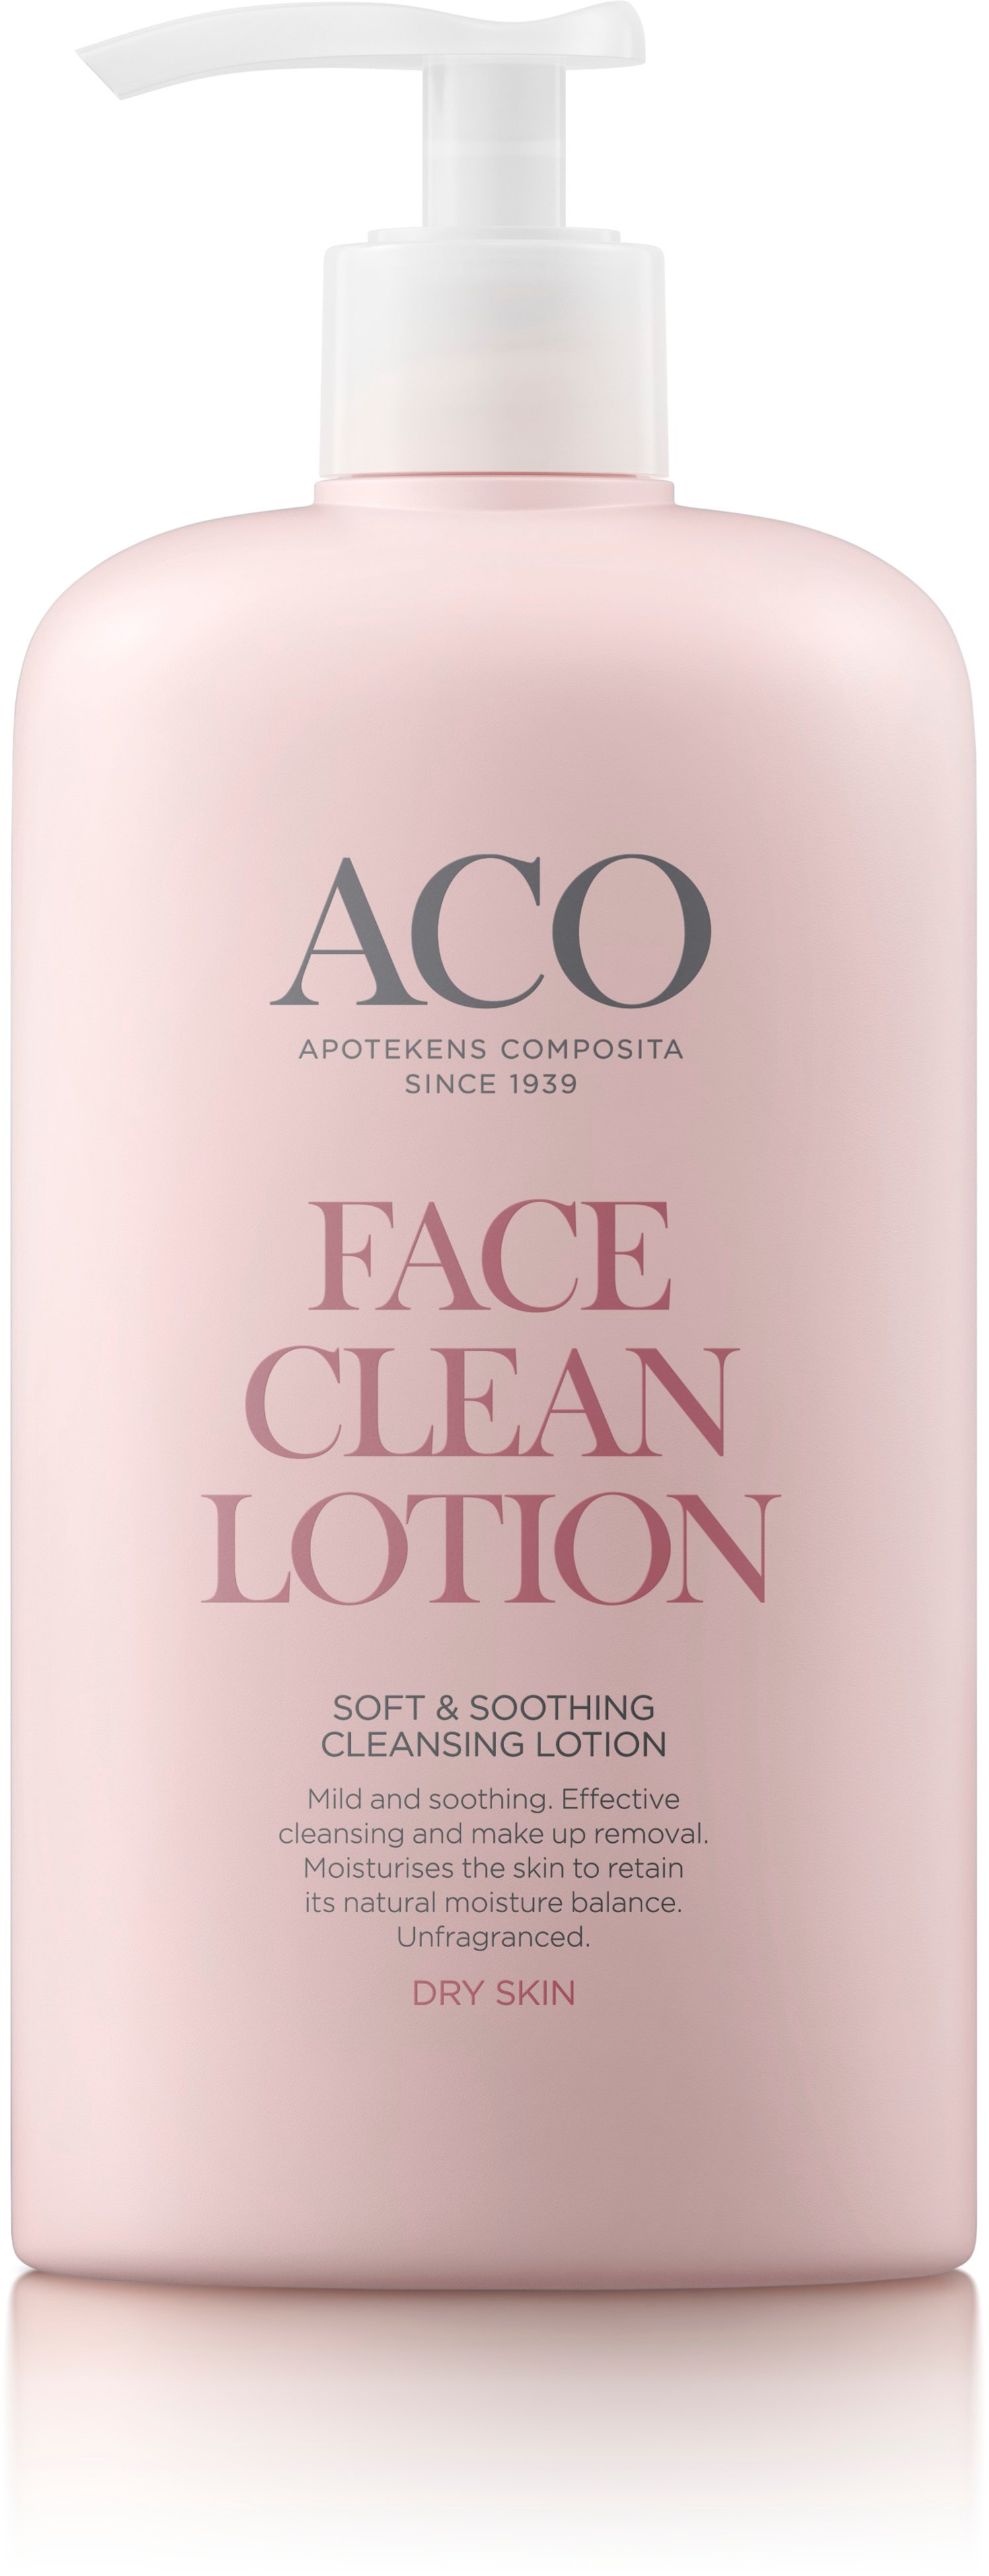 Aco Face Soft & Soothing Cleansing Lotion Ansiktsrengöring 400 ml